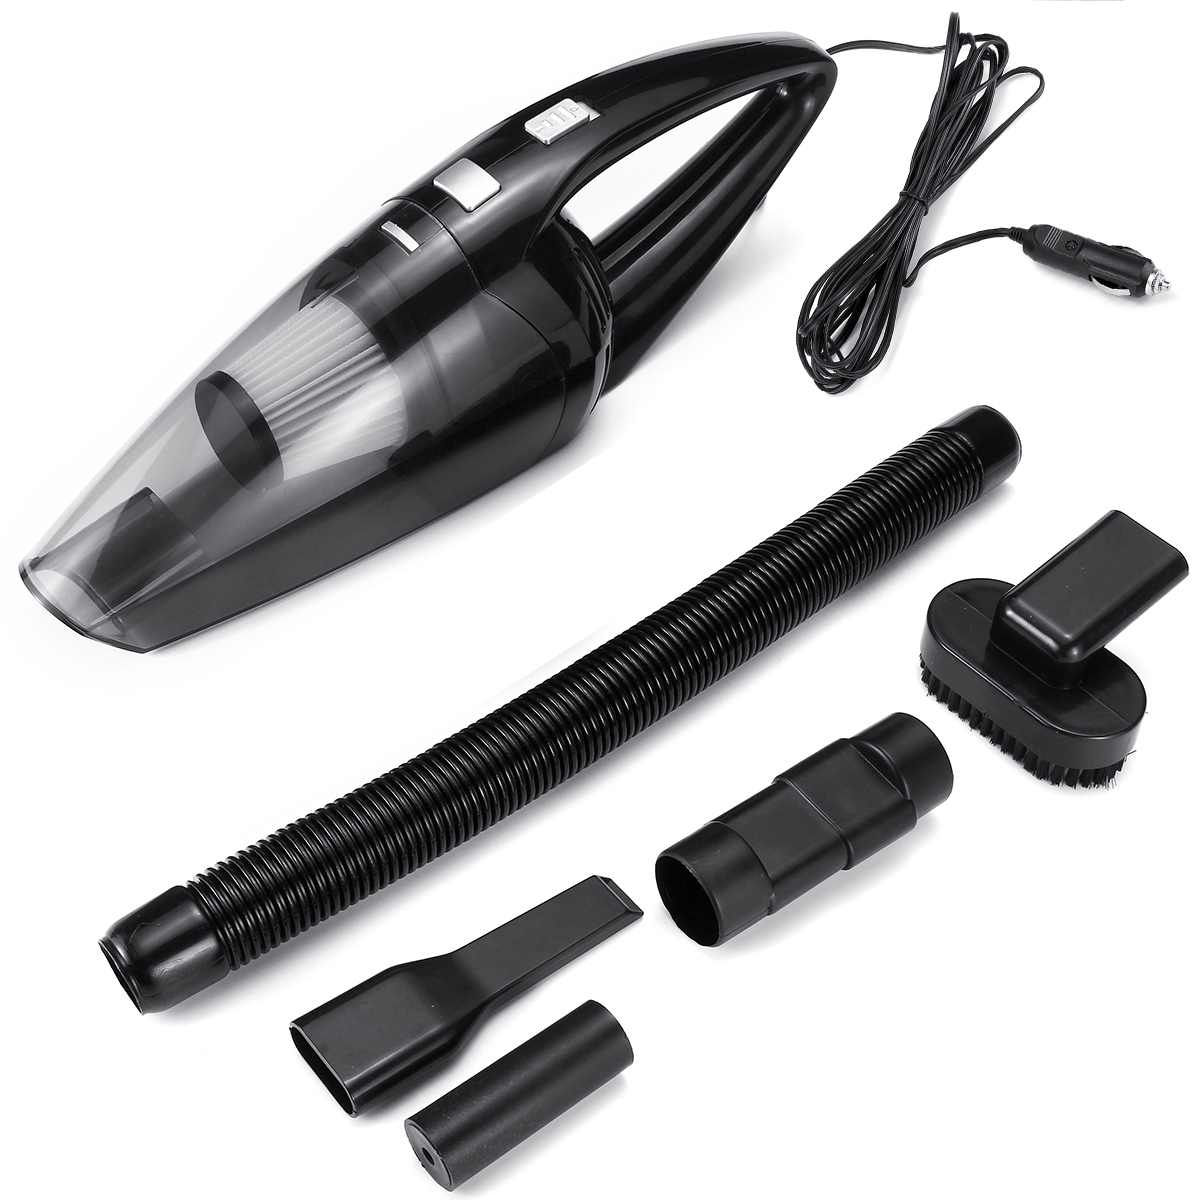 

120W Handheld Portable Auto Vacuum Cleaner Super Suction Wet/Dry Dual Use Cleaning Tool